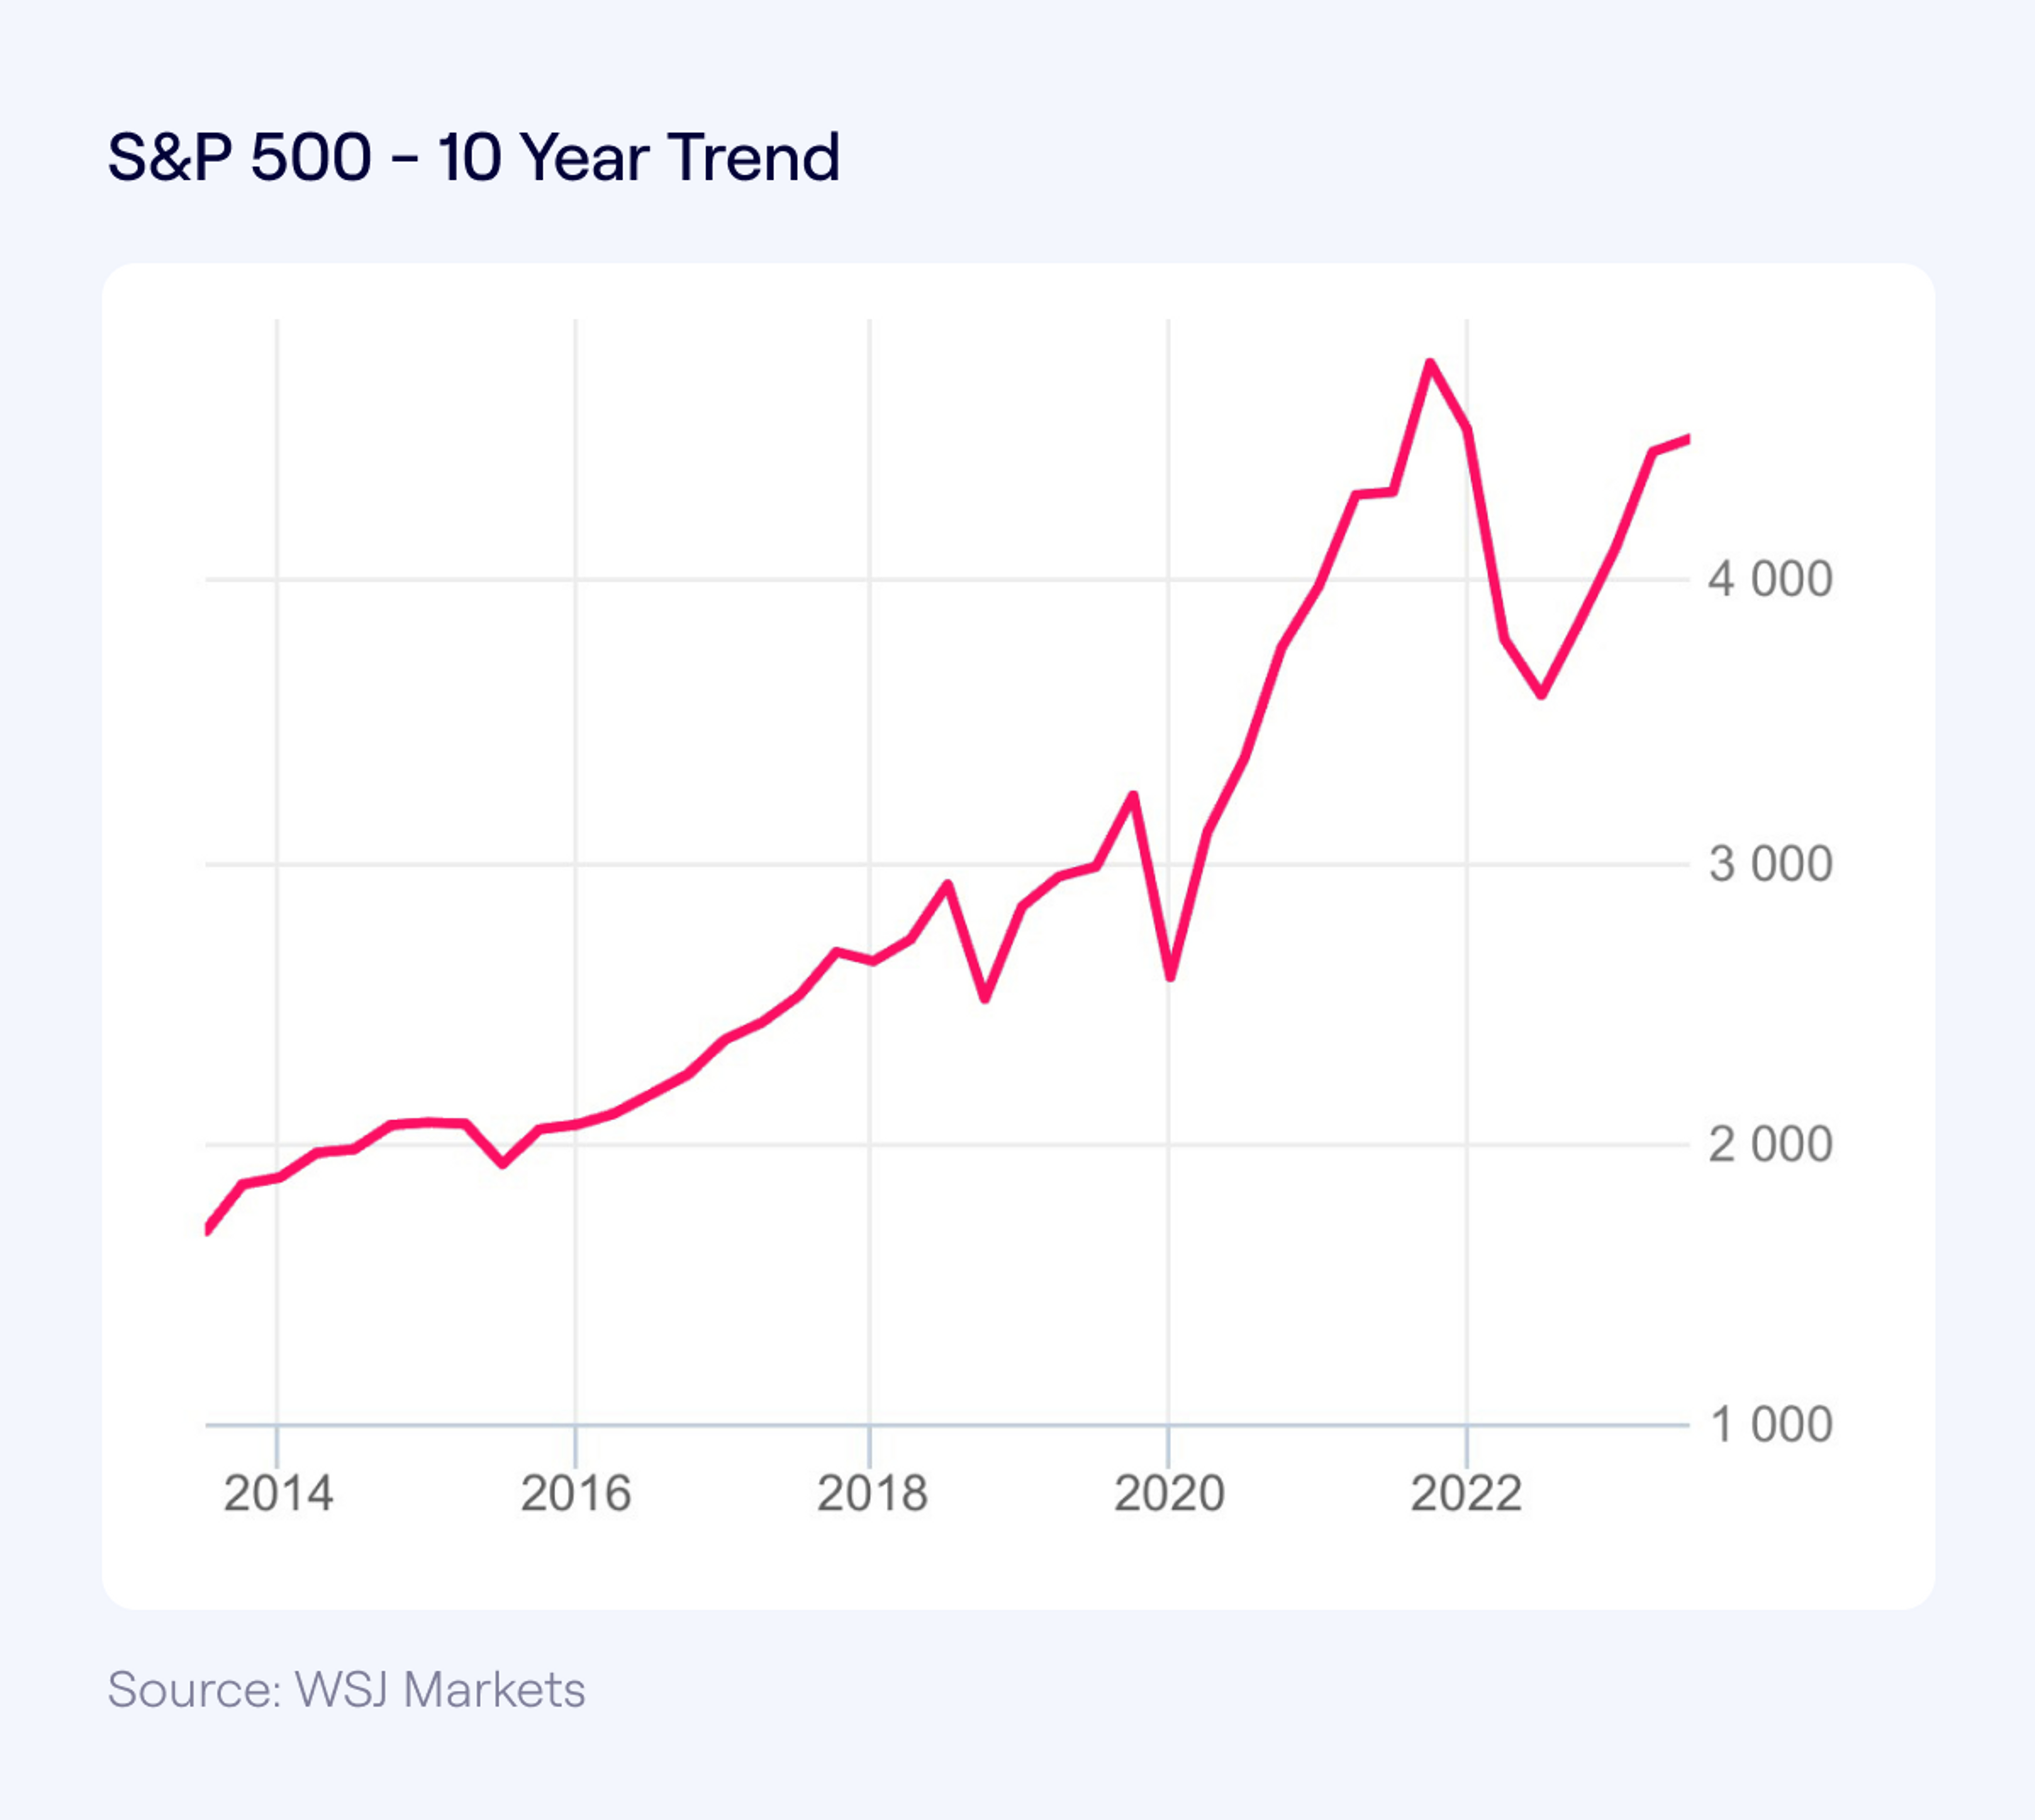 S&P500 10 year trend